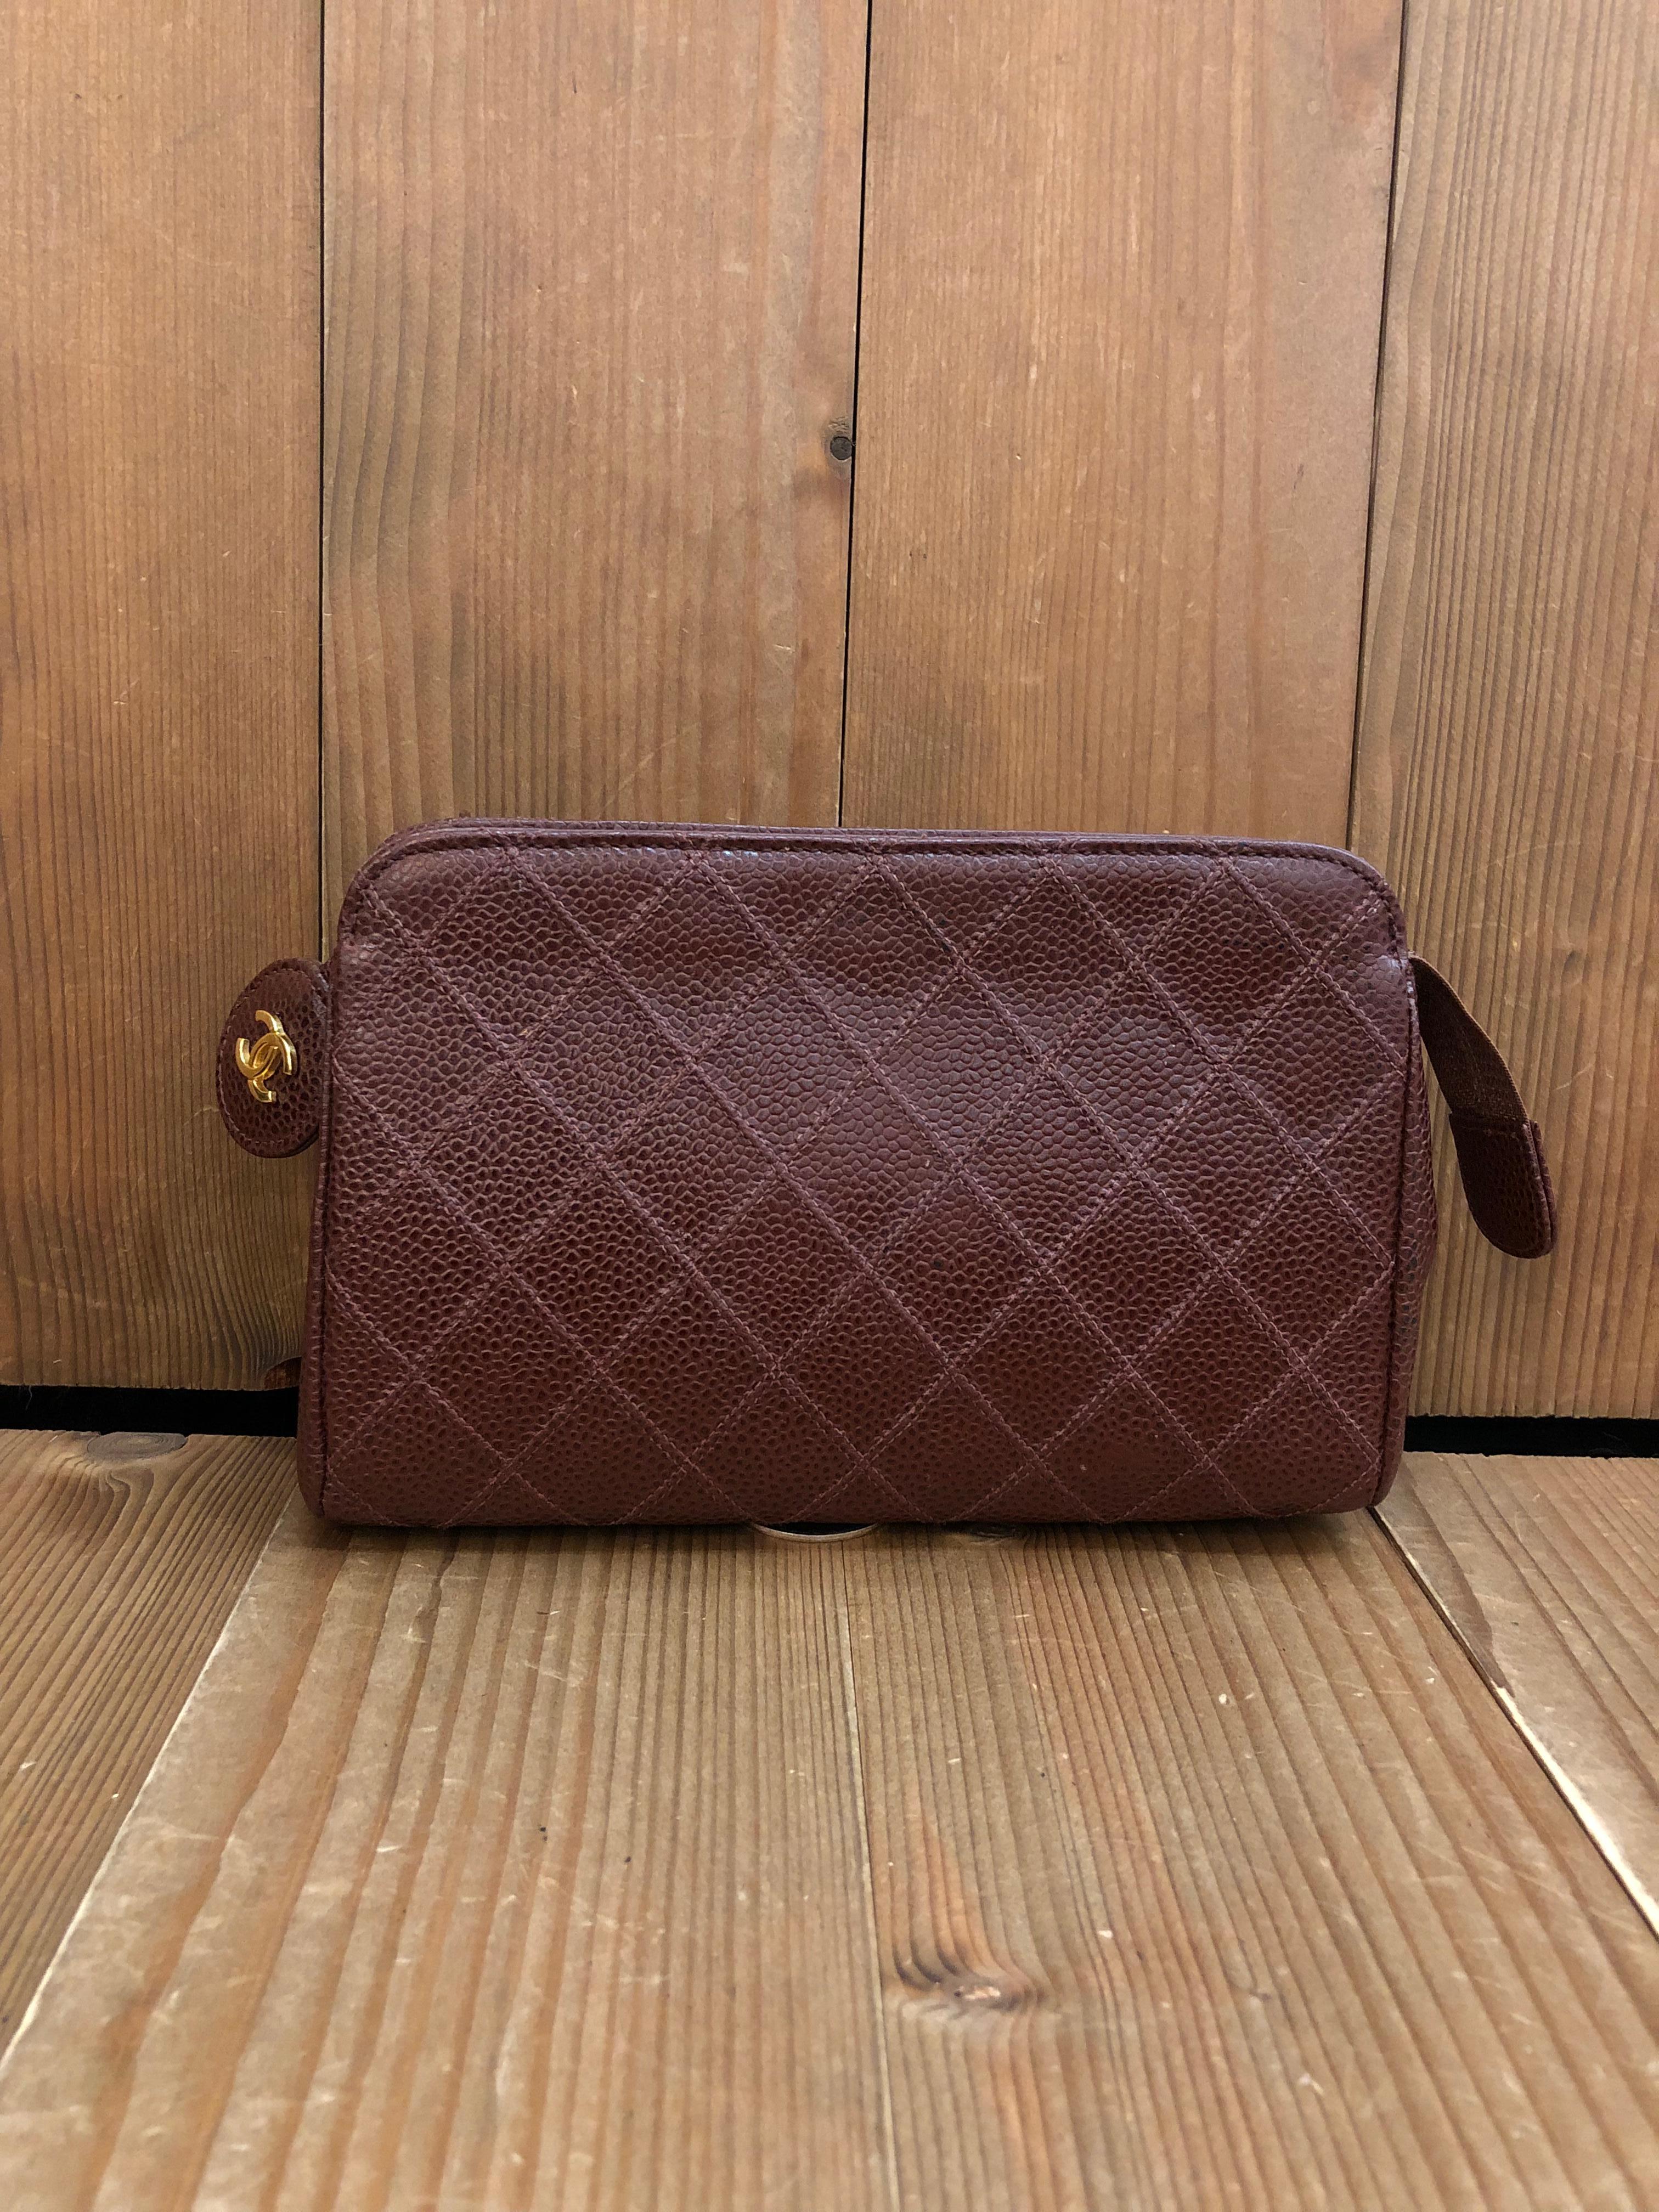 This vintage CHANEL pouch clutch bag is crafted of brown caviar calfskin leather in diamond quilted pattern. Top zipper closure opens to a new beige interior. 5xxxxxx holo sticker. Measures approximately 7 x 4.25 x 2 inches.

Condition: Good vintage